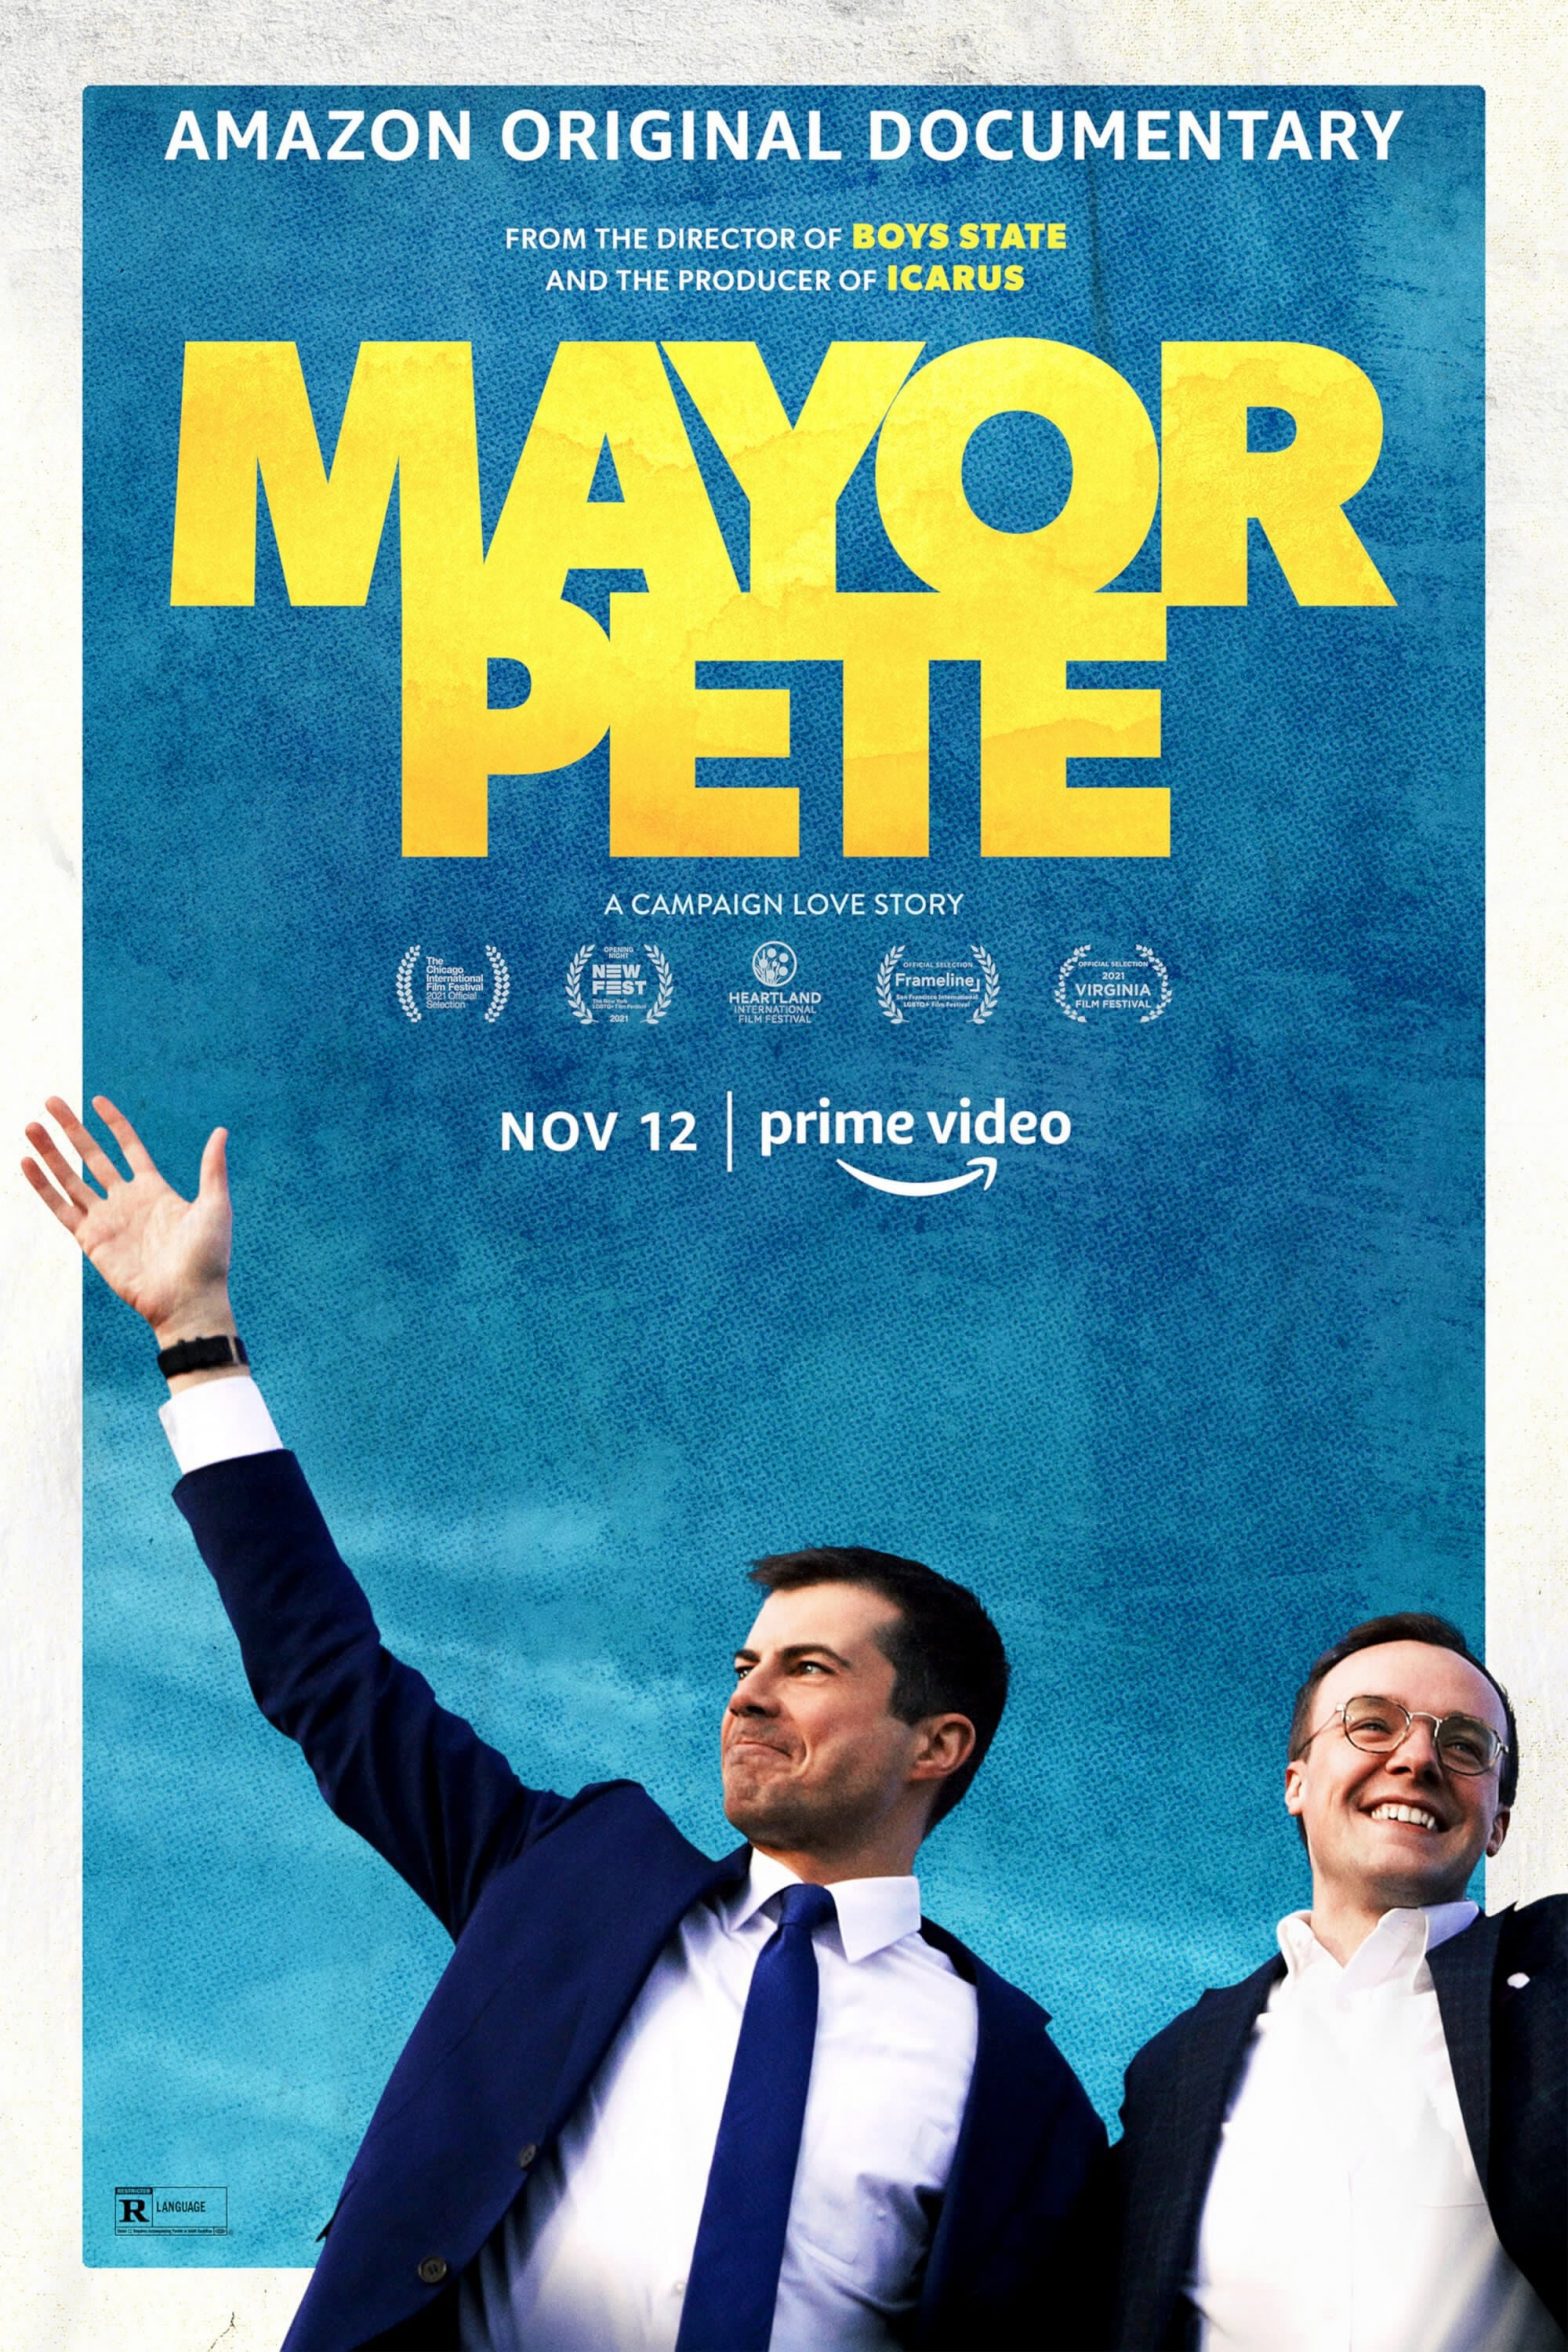 Poster for the movie "Mayor Pete"